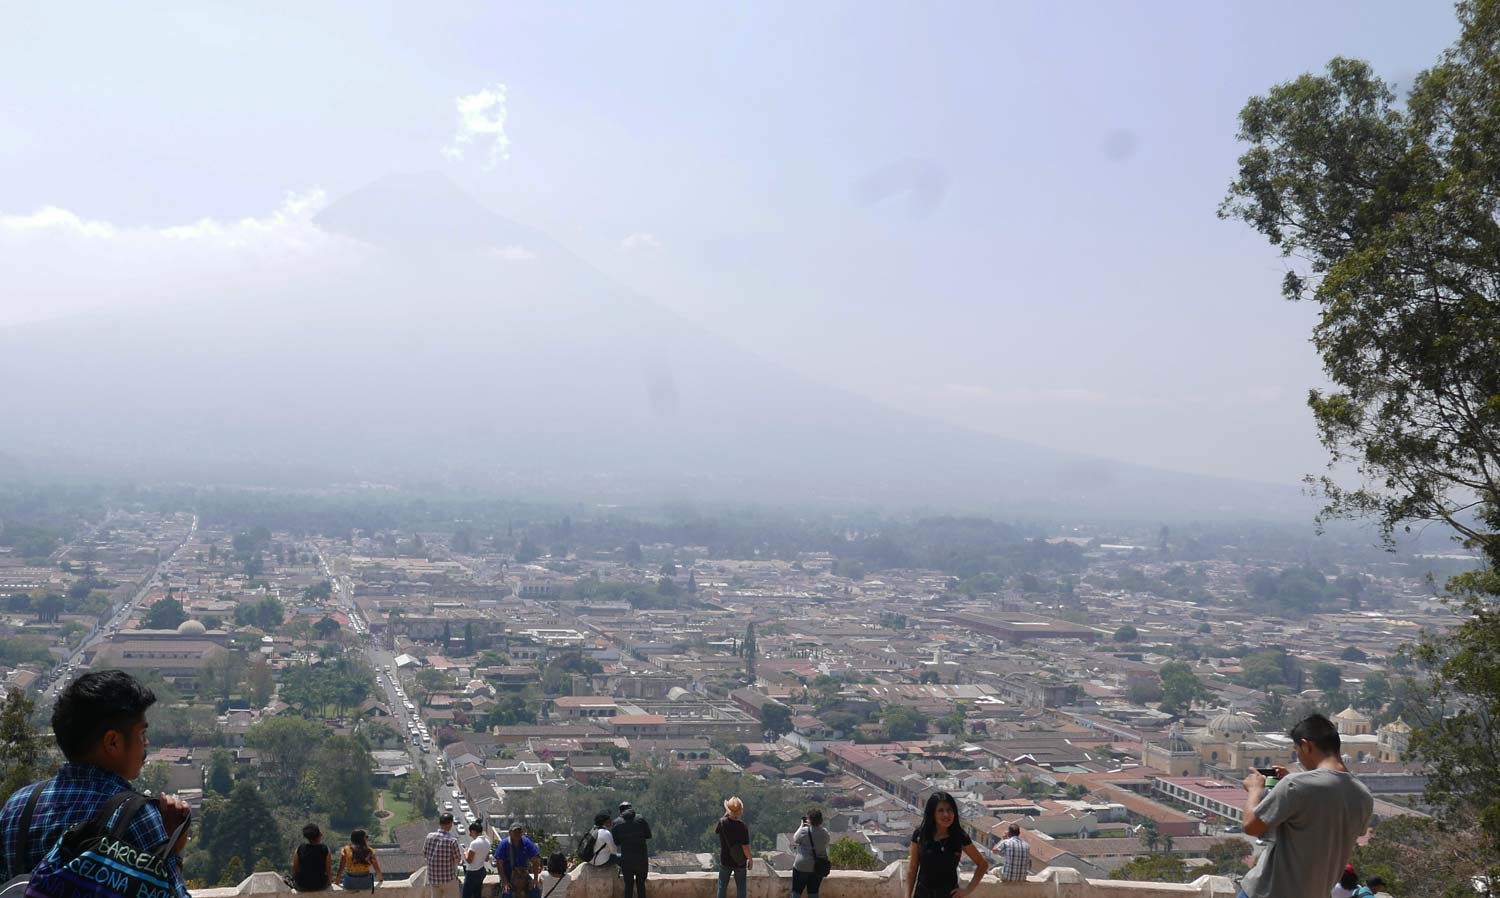 Panorama picture of Antigua Guatemala, with Volcan de Agua in the background